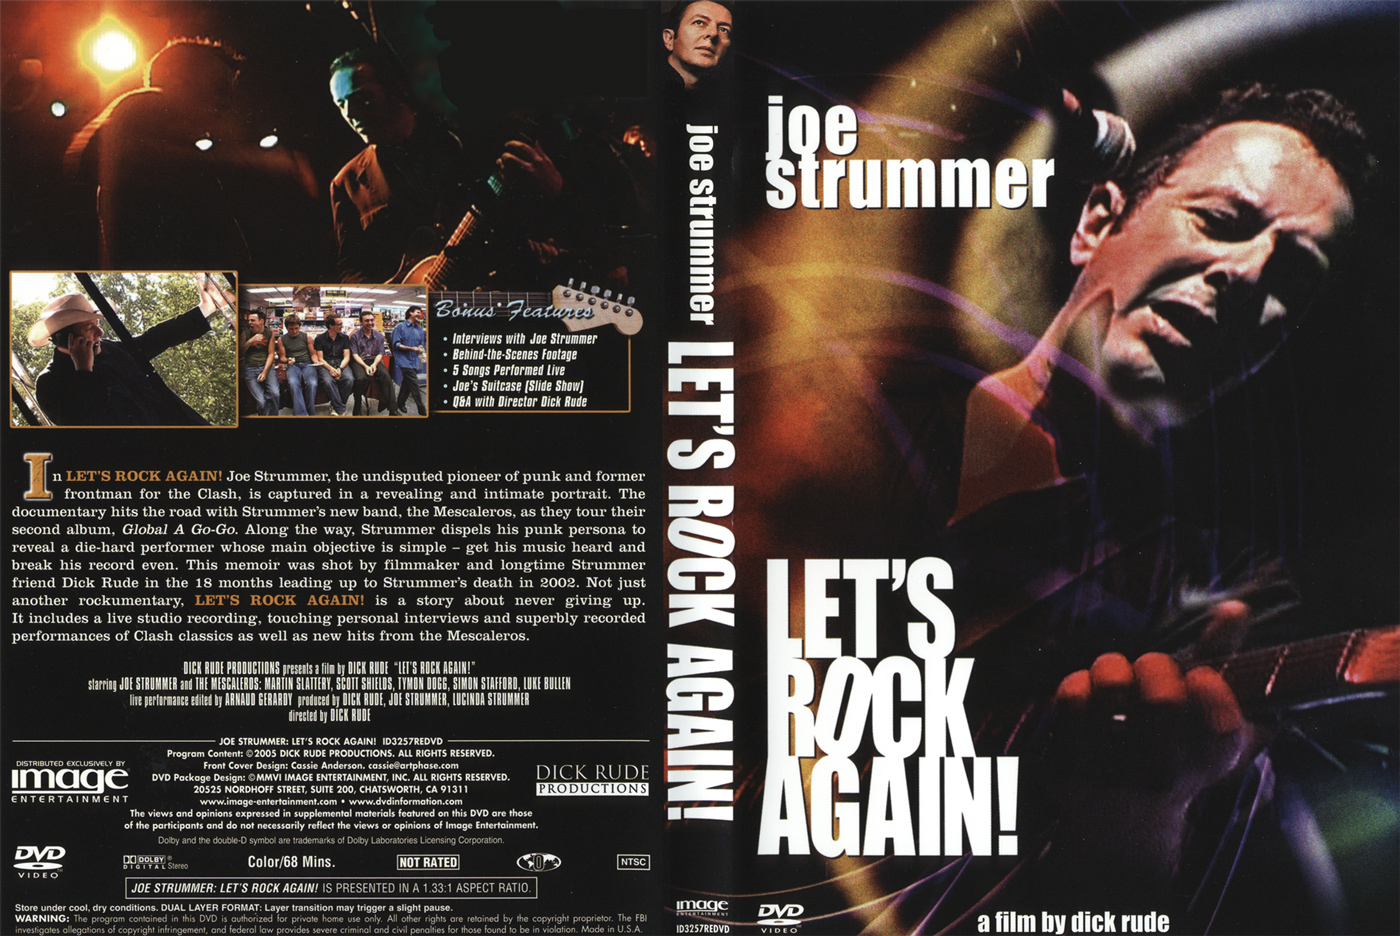 Let's Rock Again DVD Cover